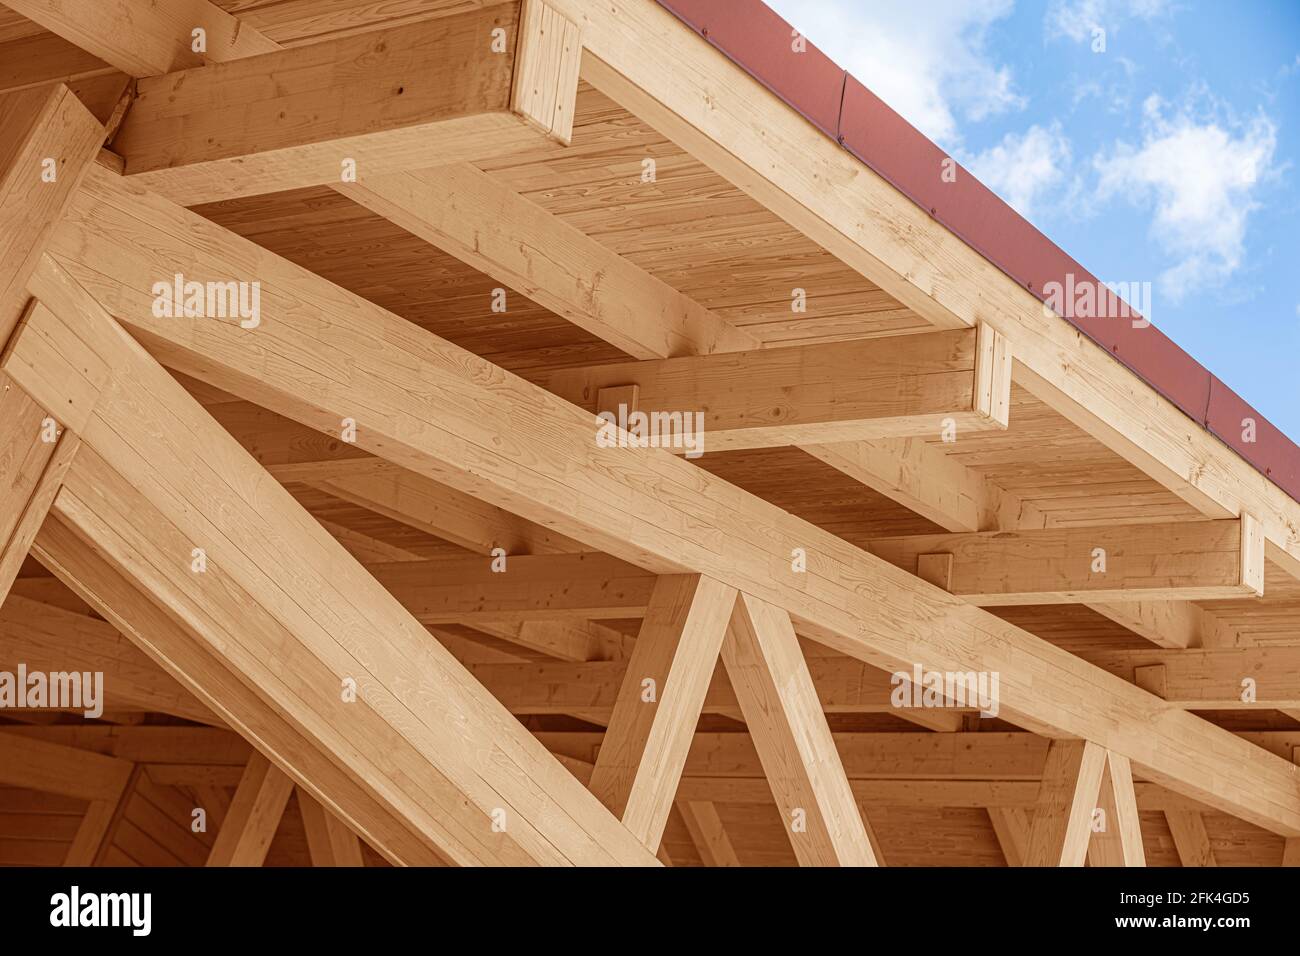 Wooden roof structure. Glued laminated timber roof. Stock Photo